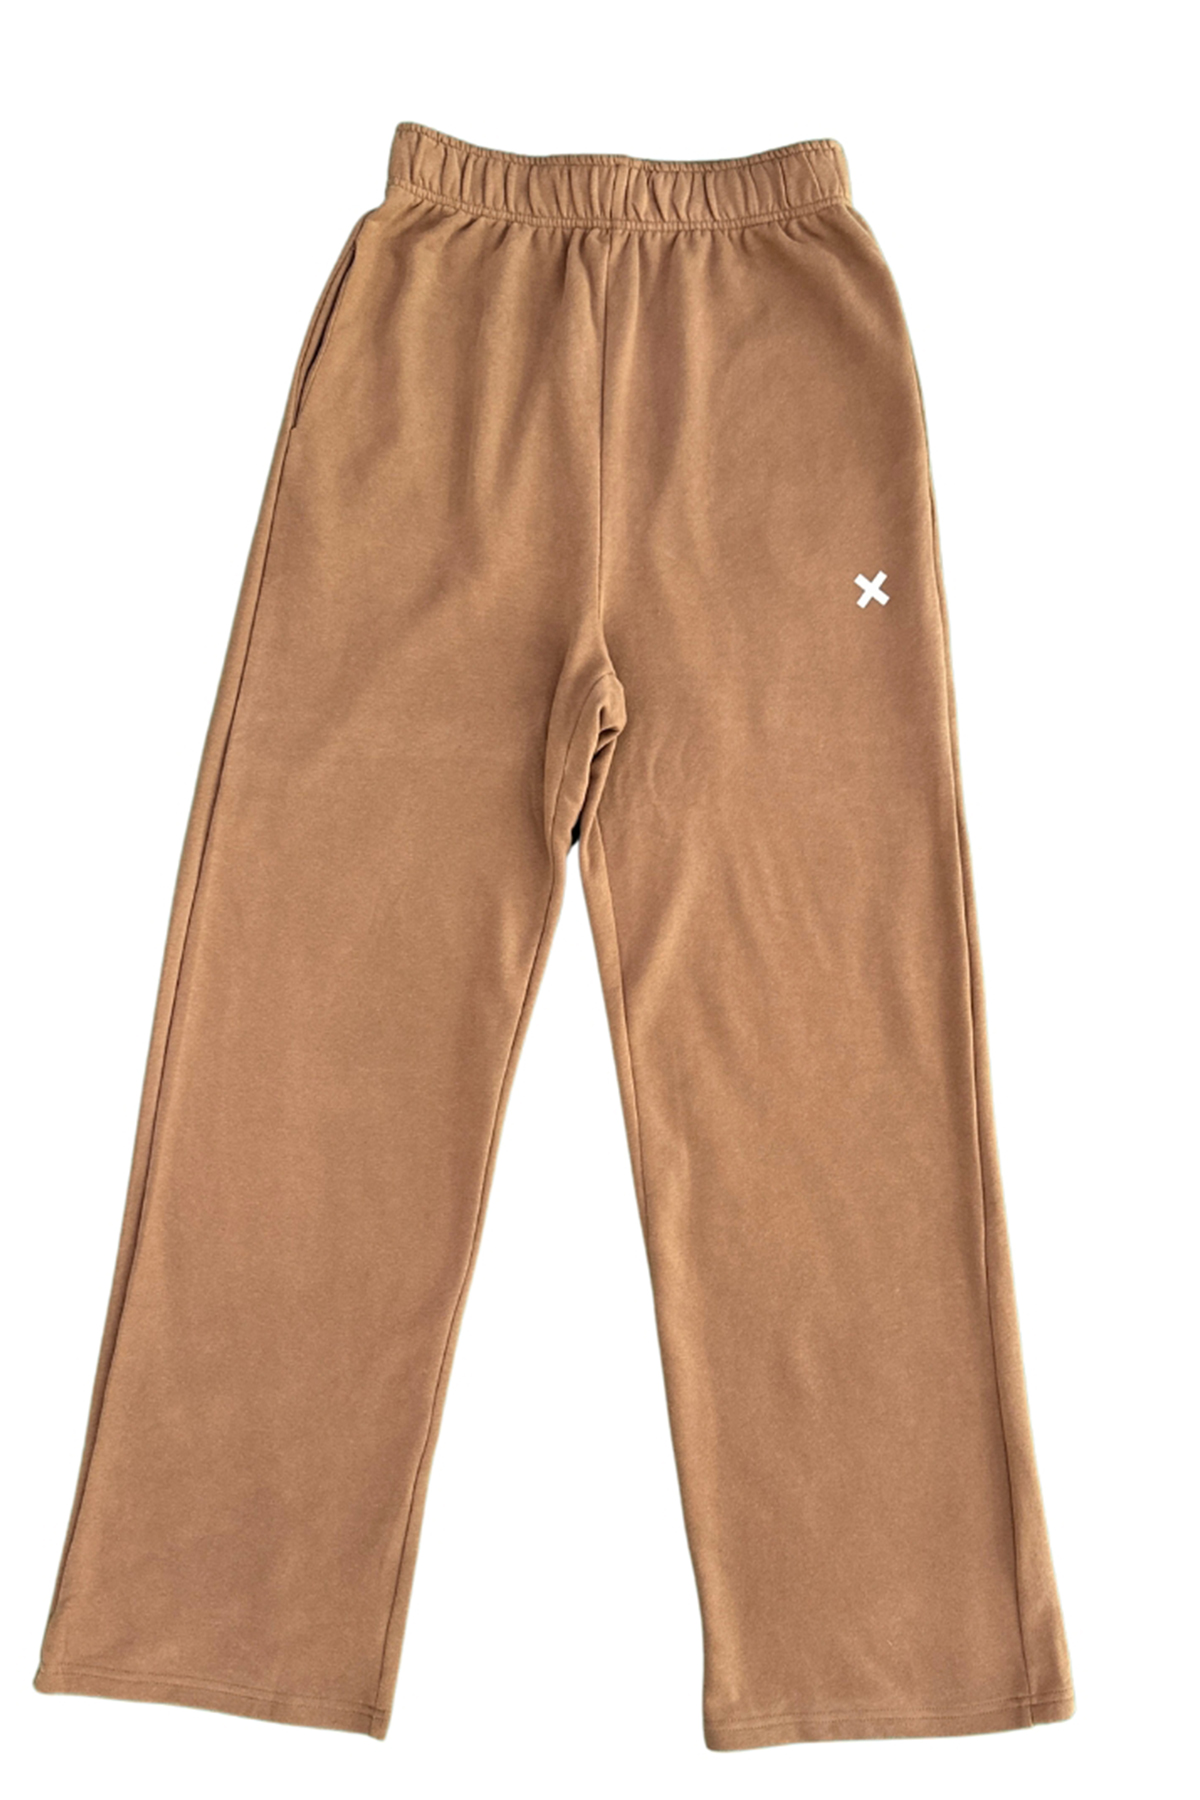 Time-Out-X-Wide-Leg-Fitness-Pants-khaki-front